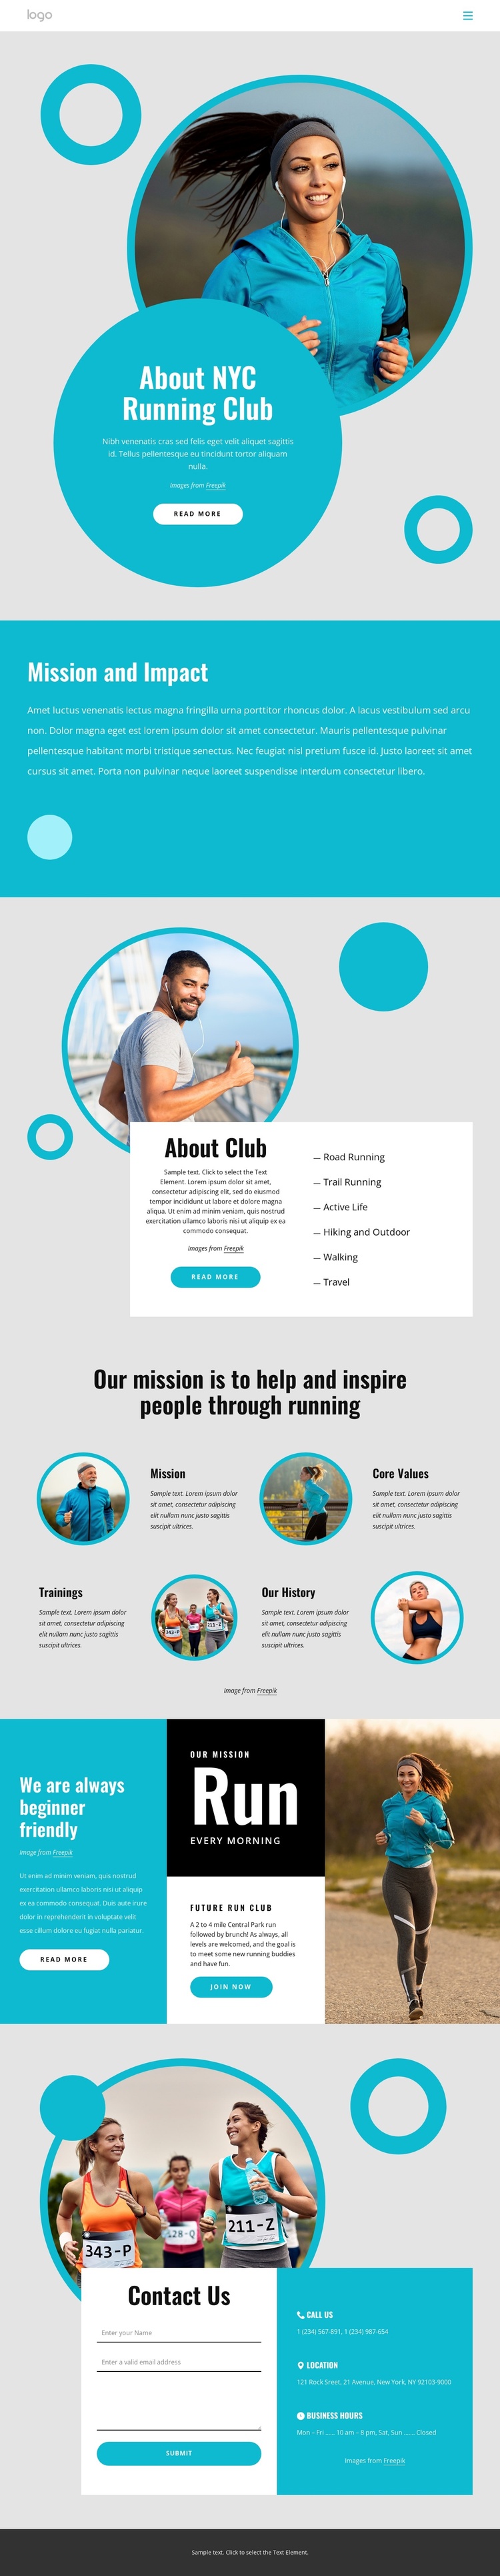 About NYC running club Joomla Template